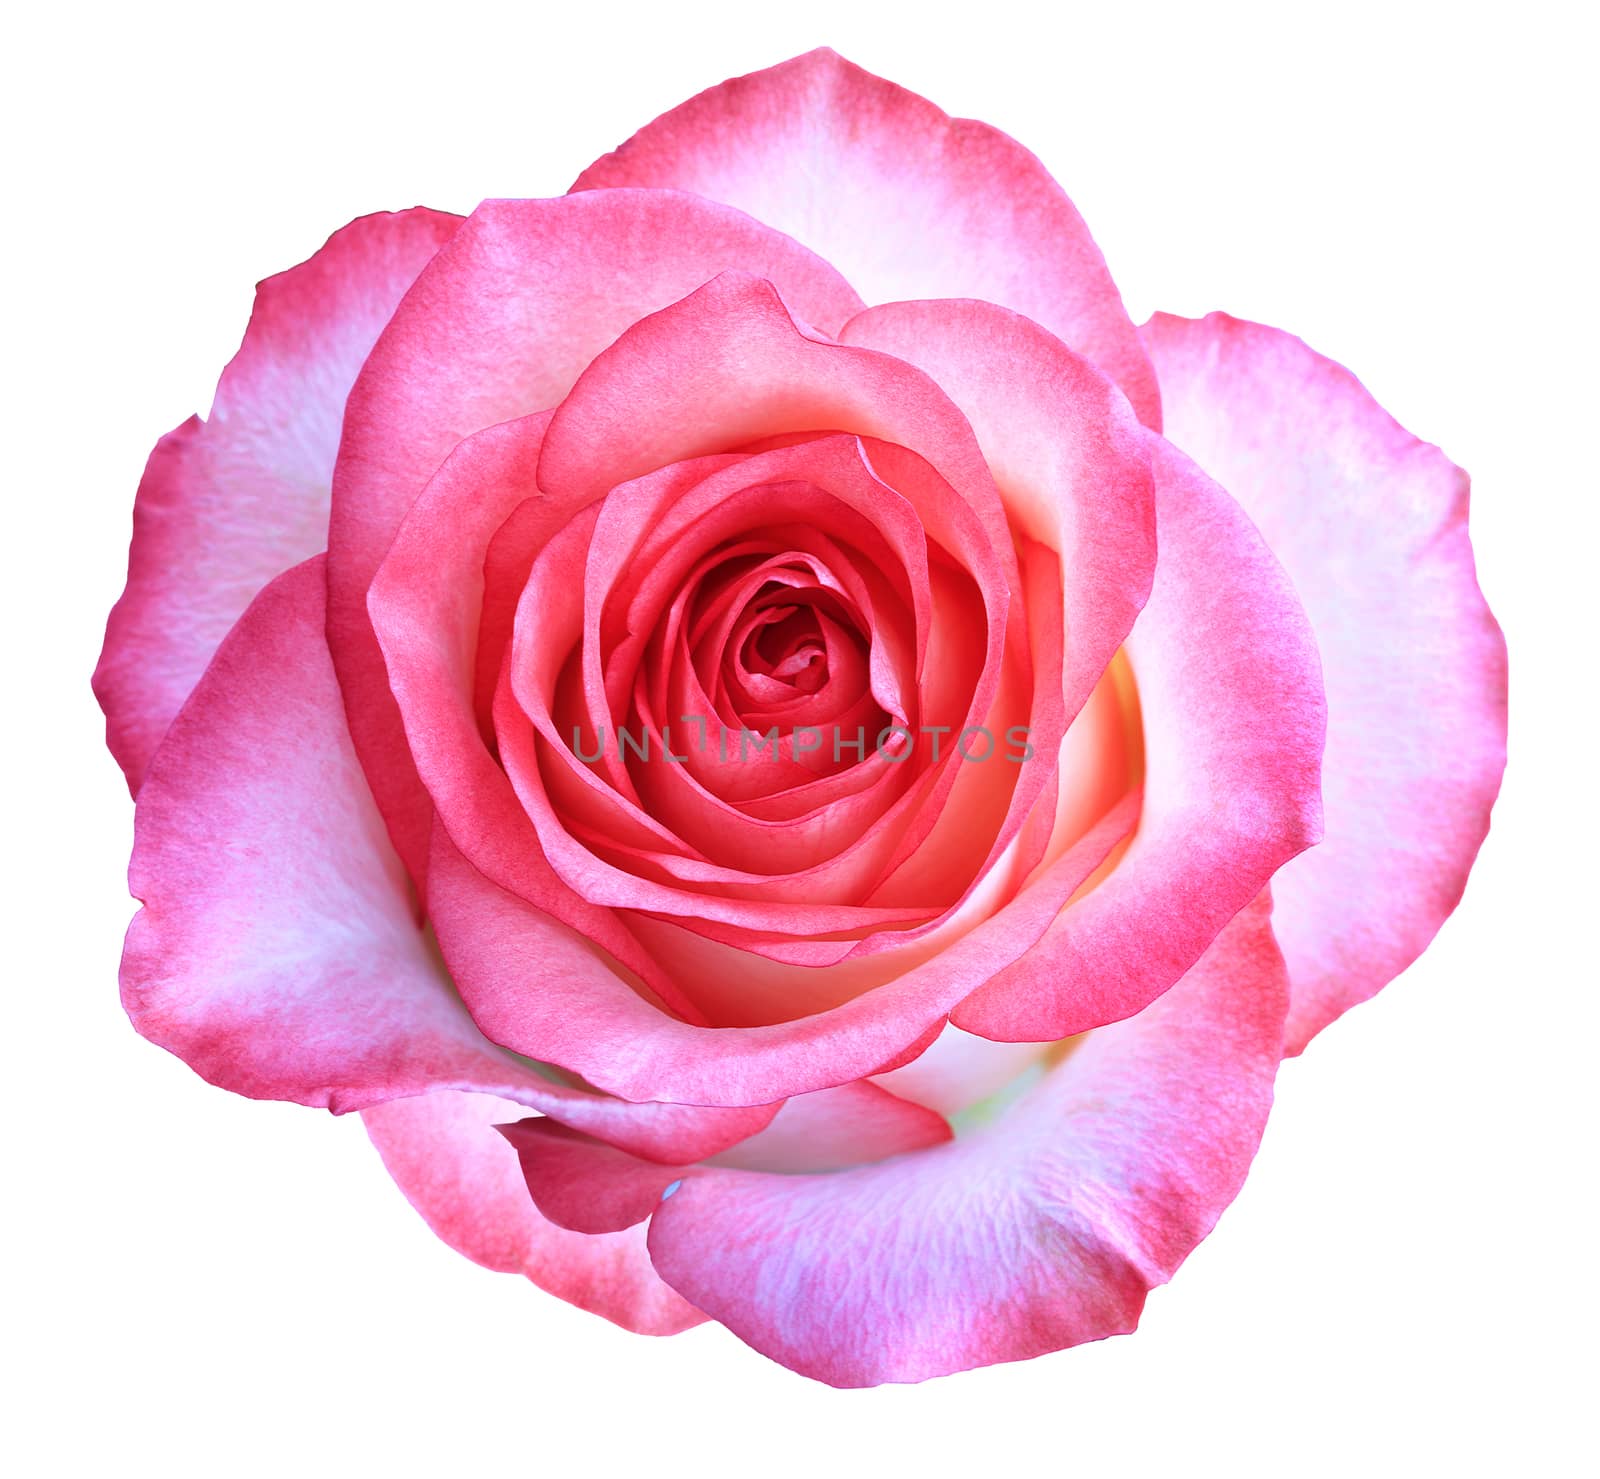 Beautiful gentle bud flower of pink rose of is isolated on a white background.